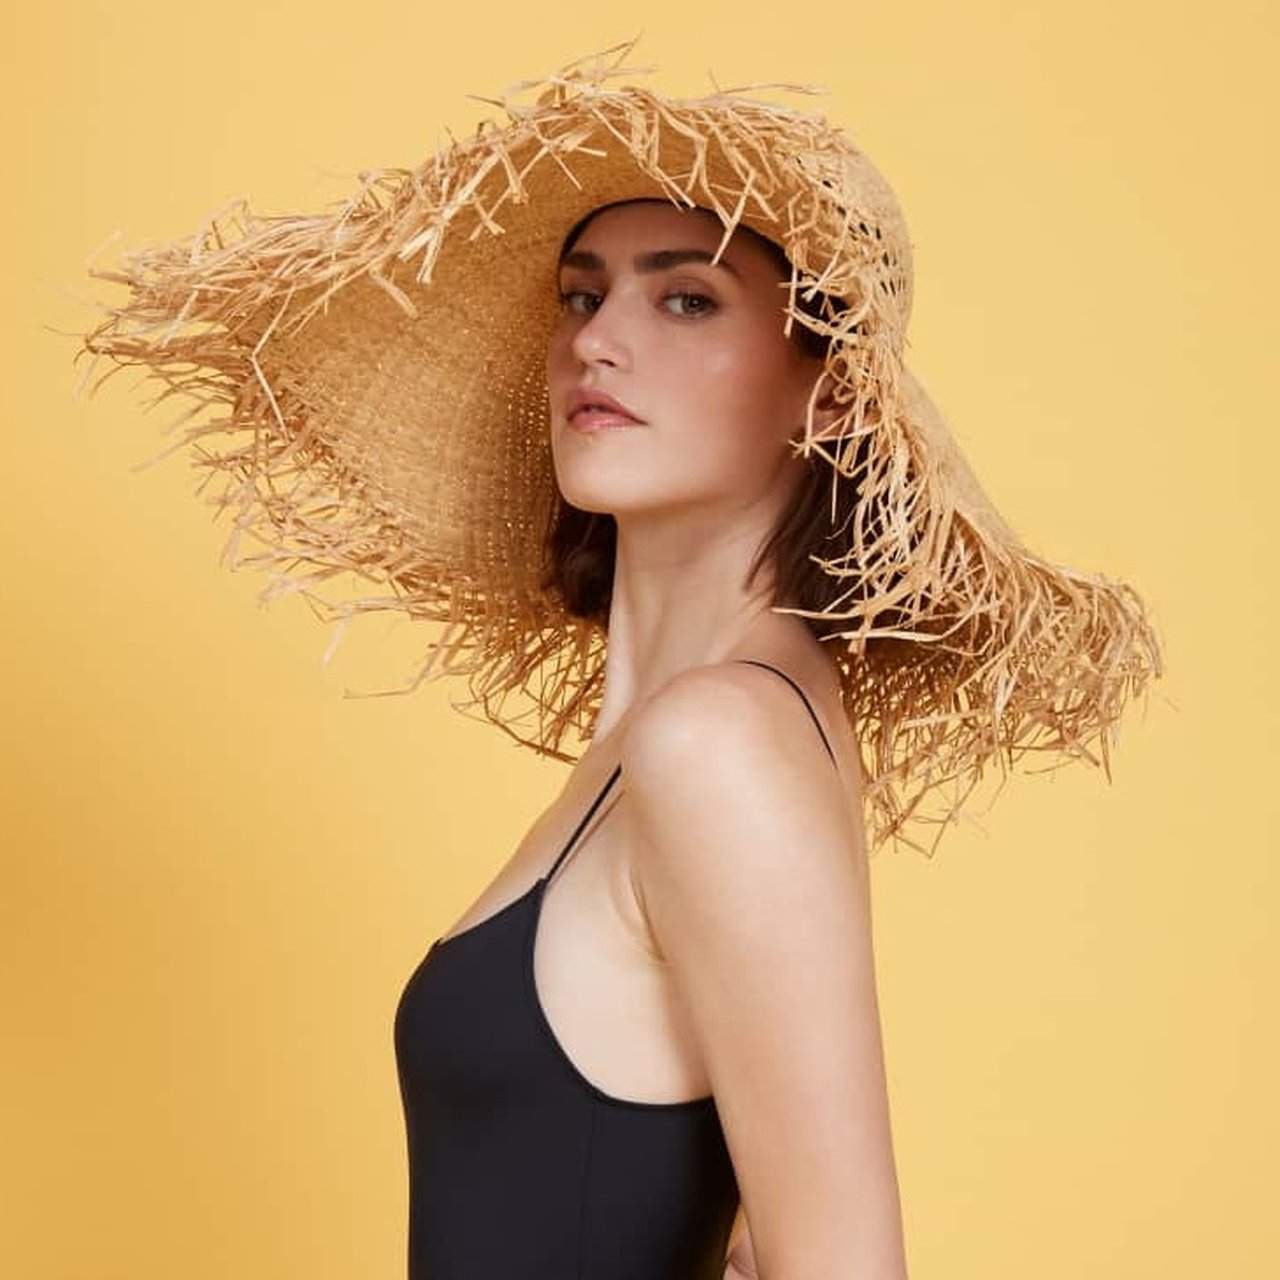 Wedding hat for women Fashion trends Summer 2019 Accessories outfit ideas